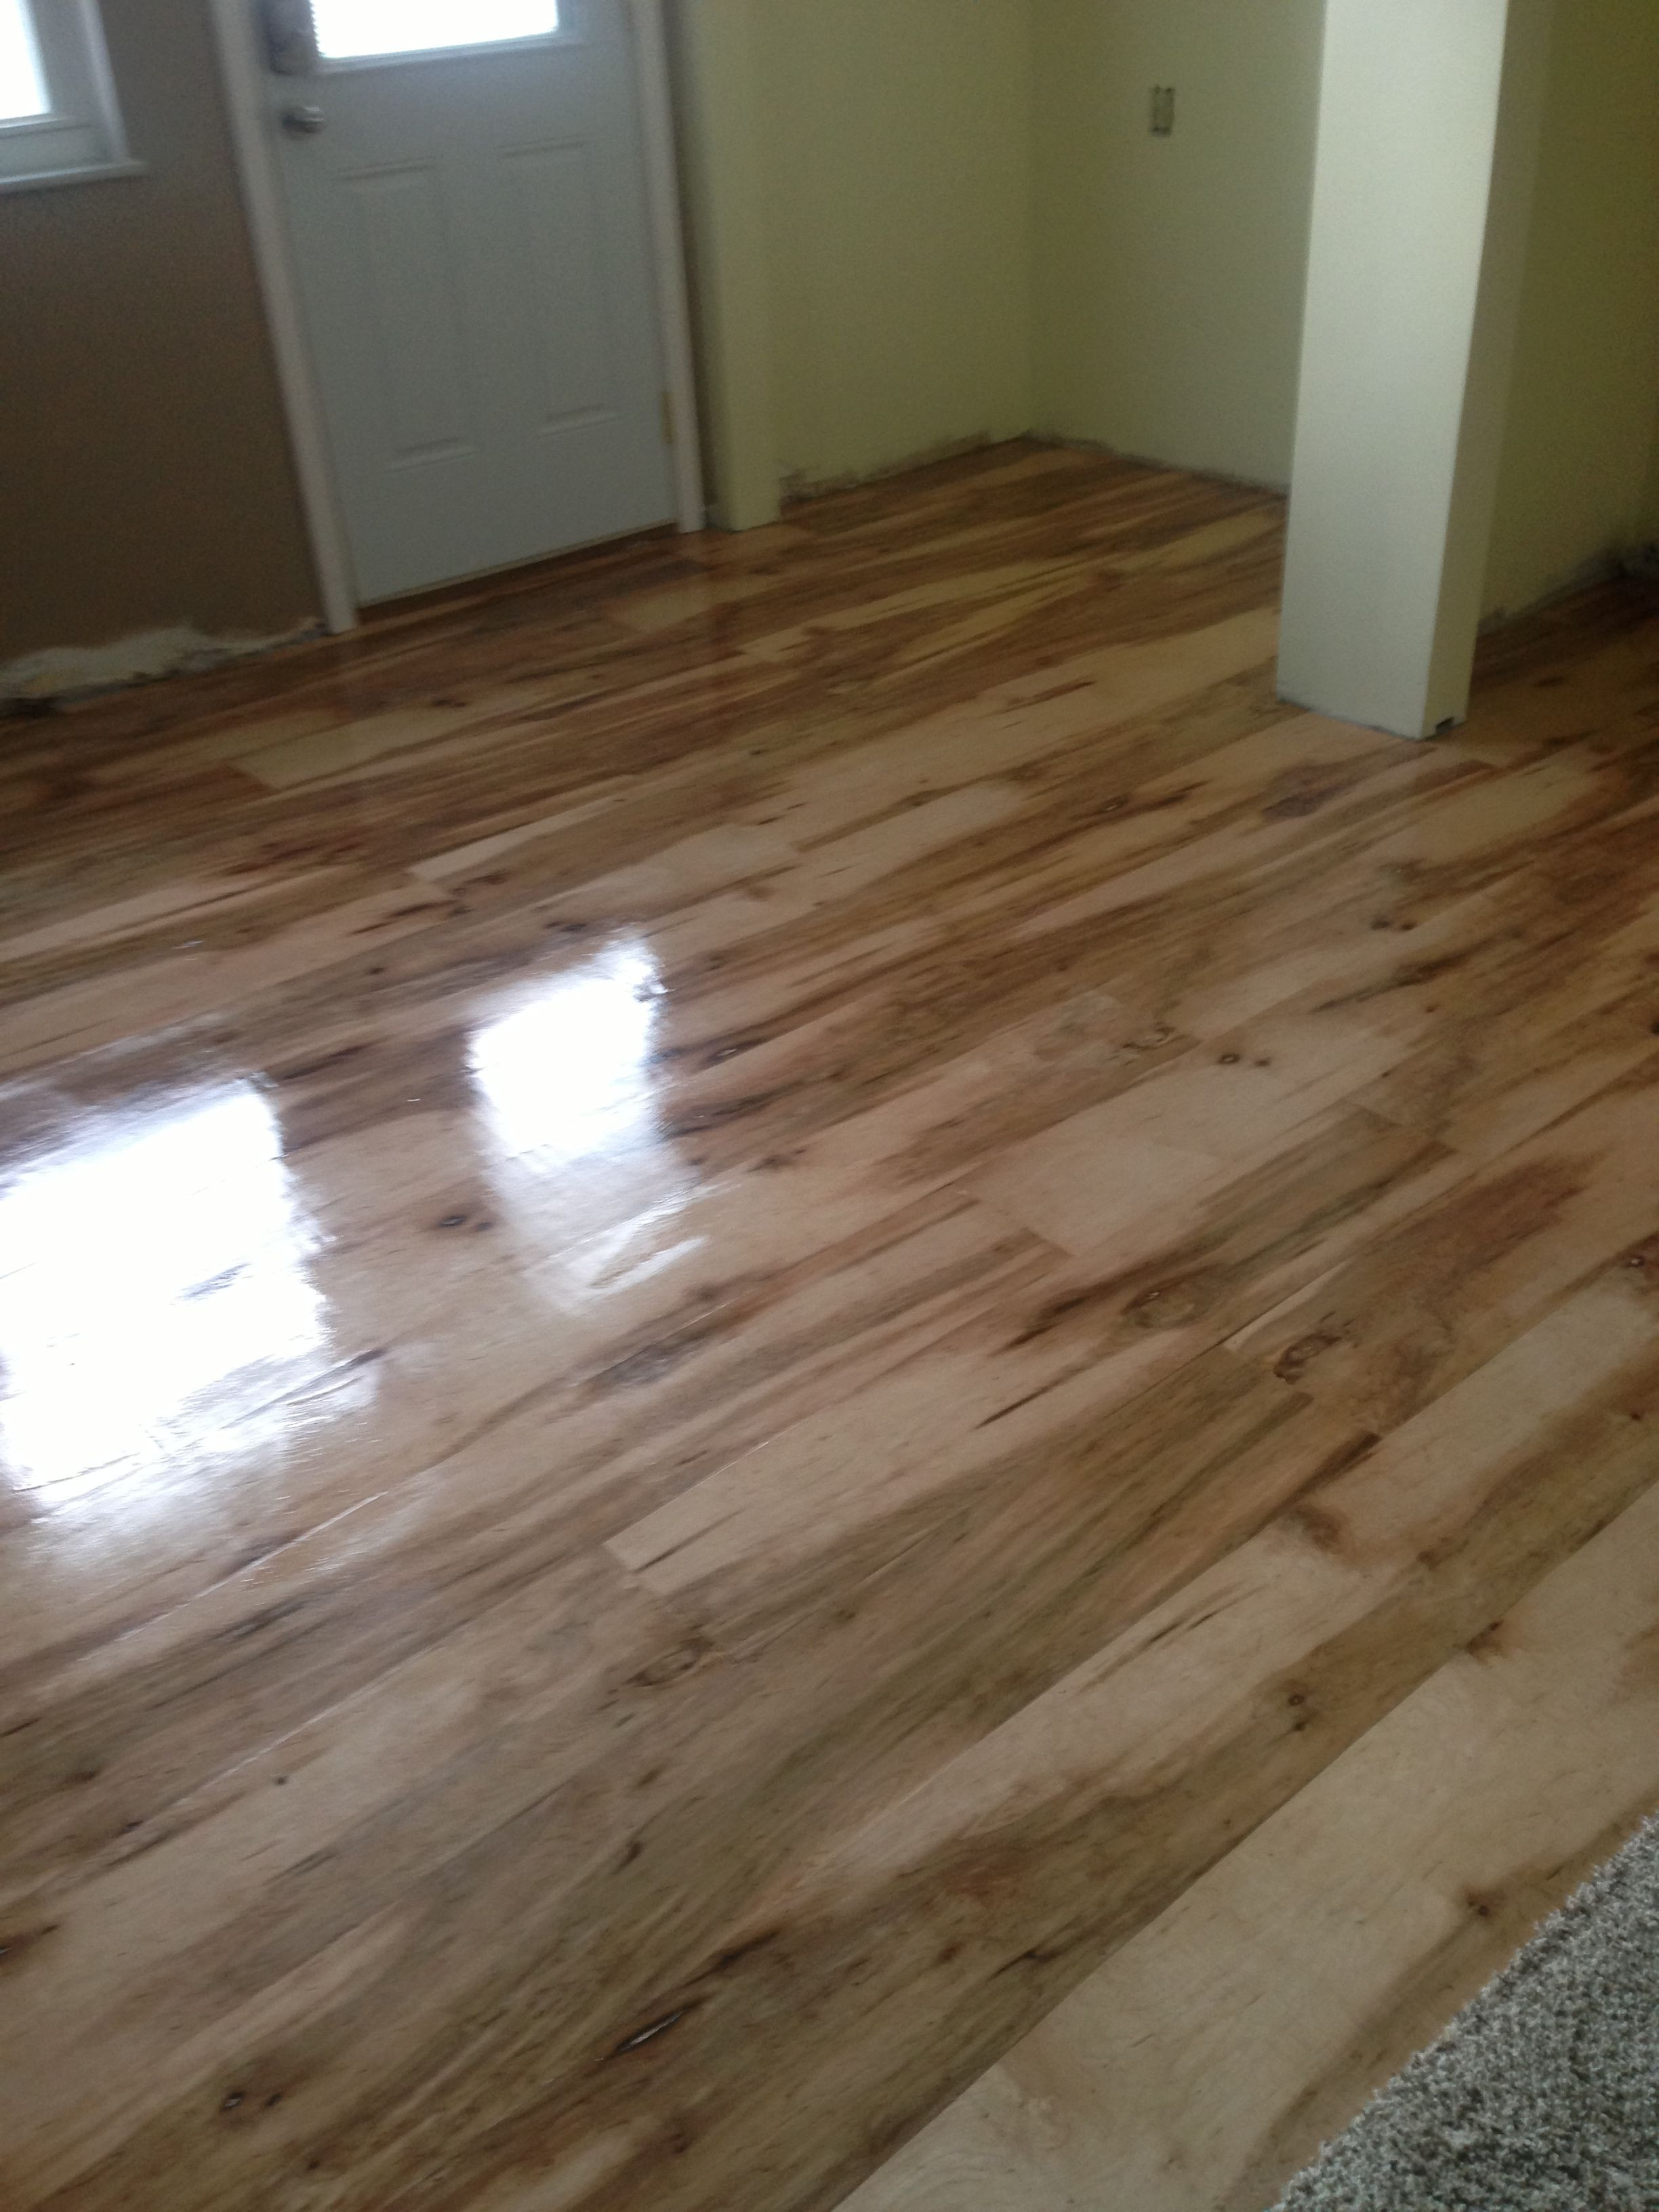 hardwood floor refinishing price calculator of cost to refinish hardwood floors floor plan ideas within cost to refinish hardwood floors the final finish of the plywood floor love only cost 100